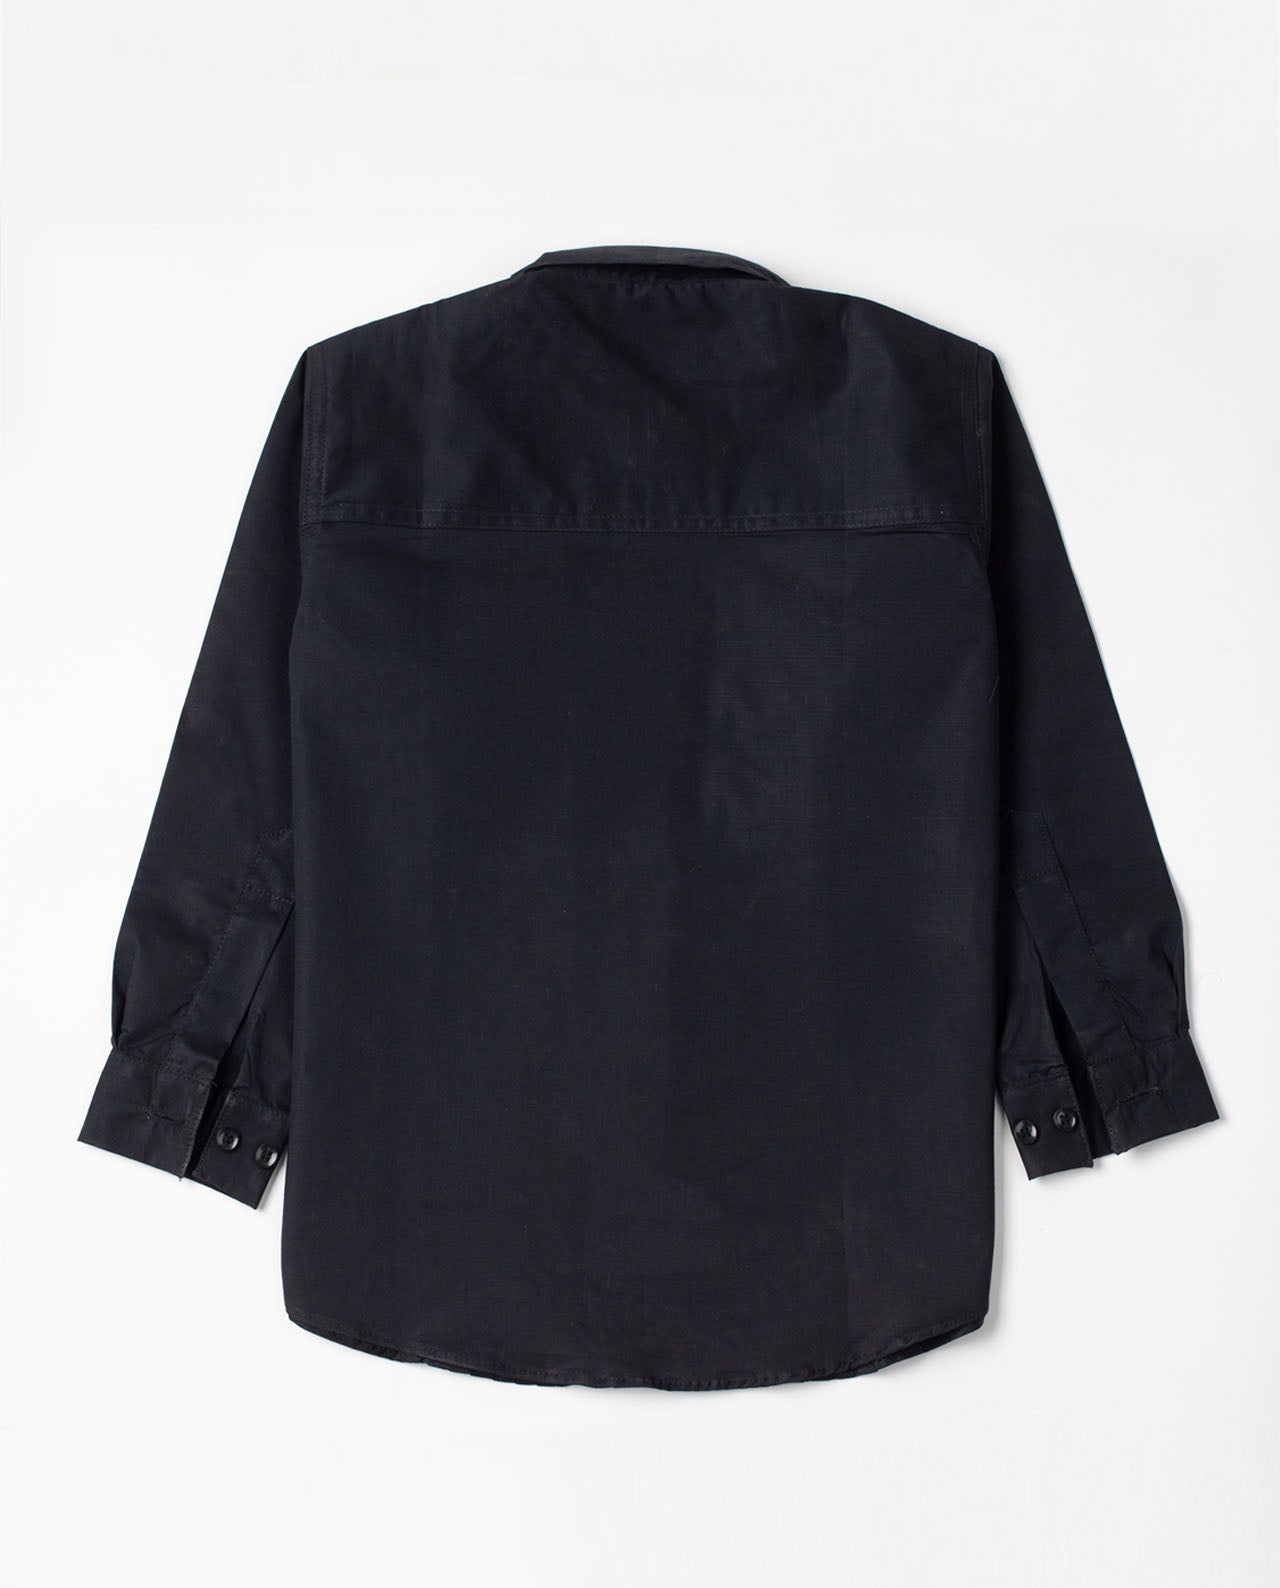 BLACK PLEATED SHIRT WITH BLACK BUTTONS